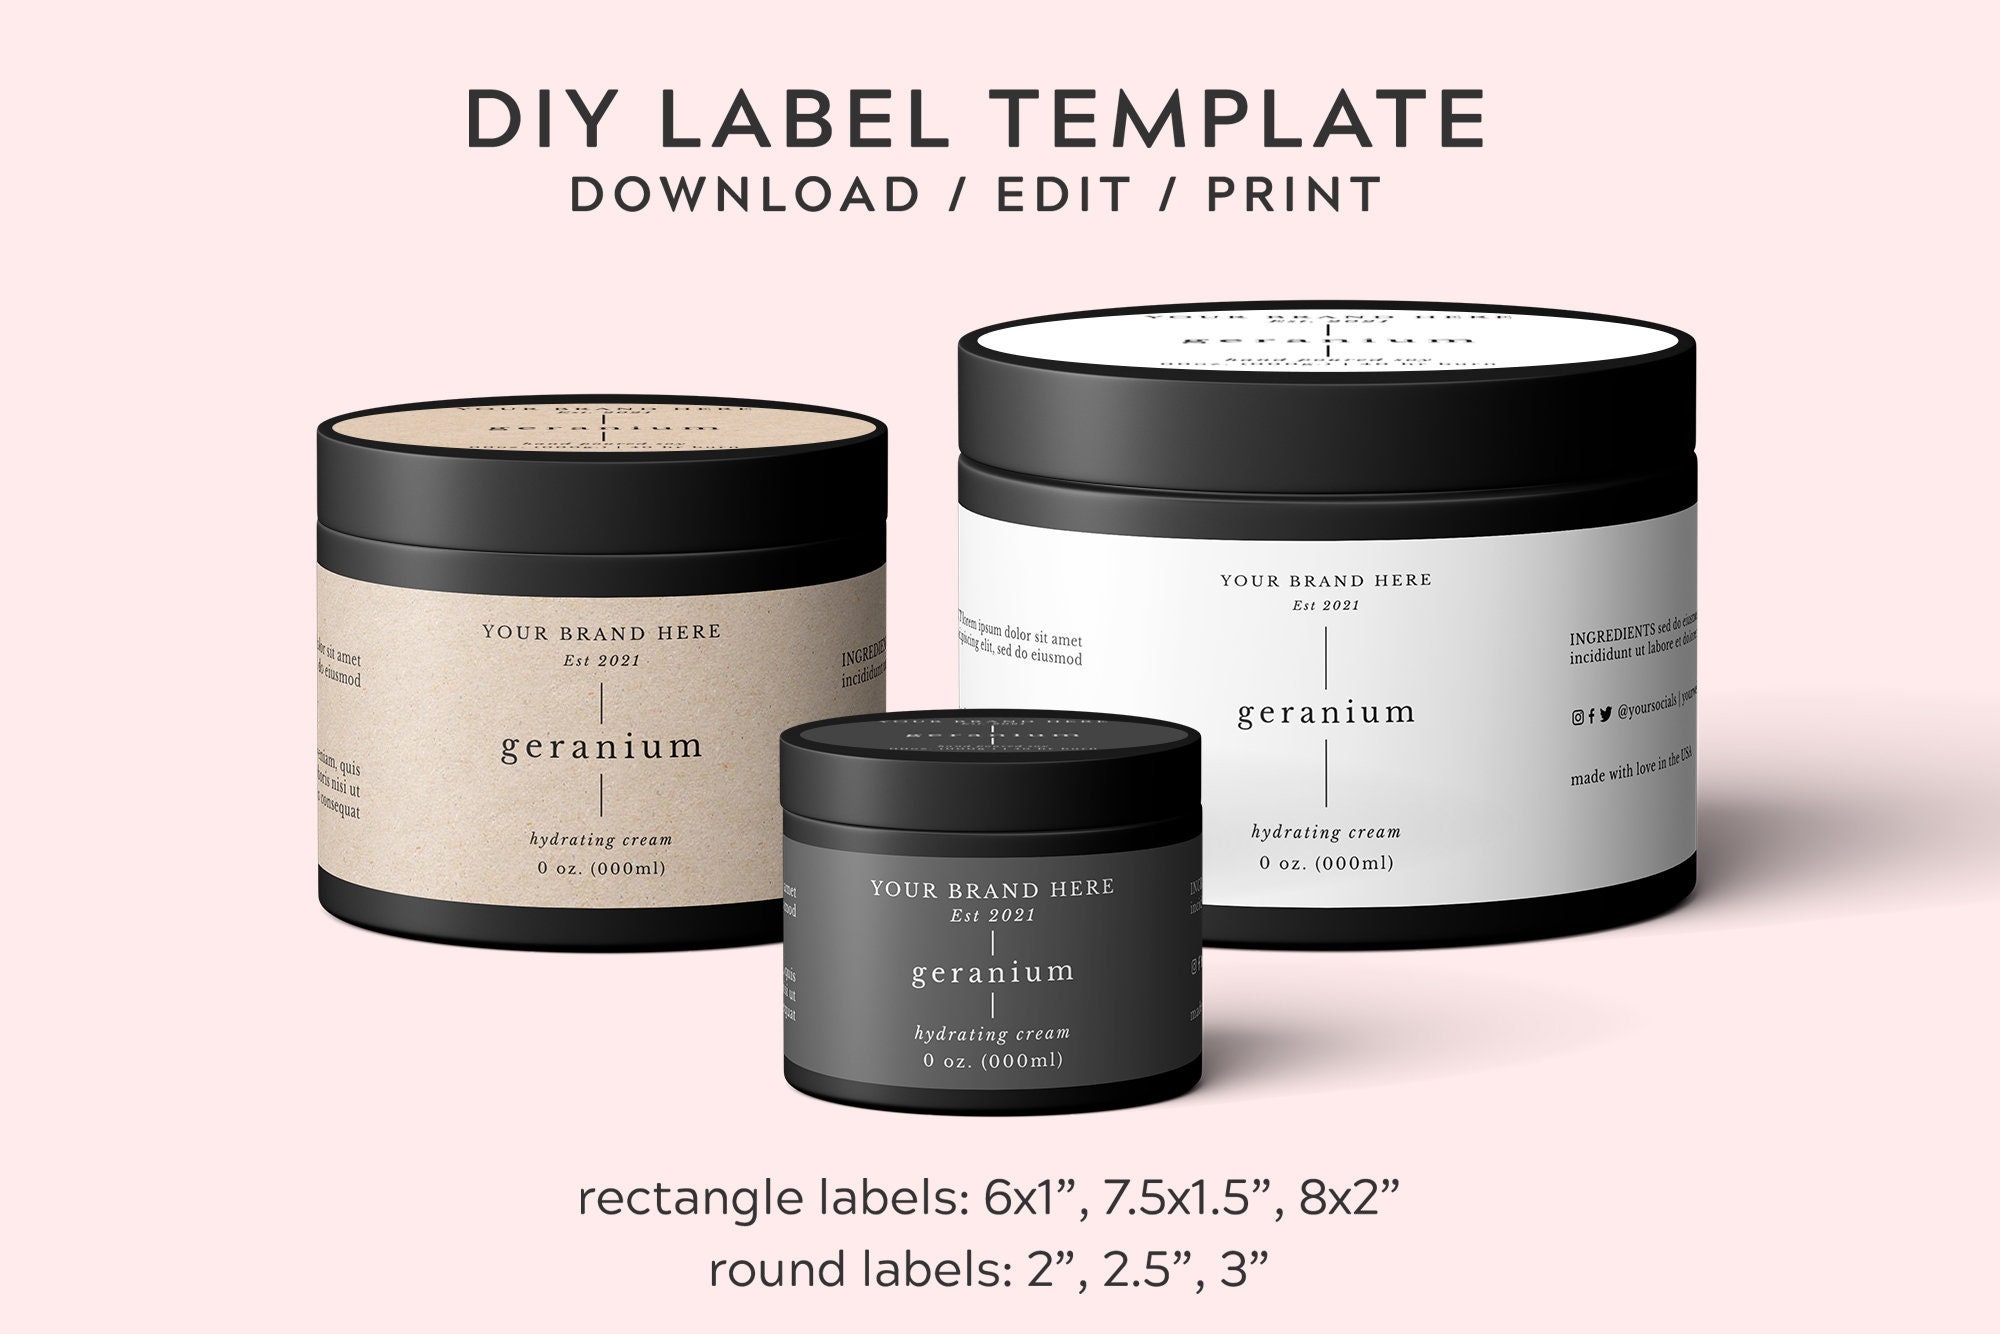 Candle Labels Template, Printable Boho Candle Label Template, DIY